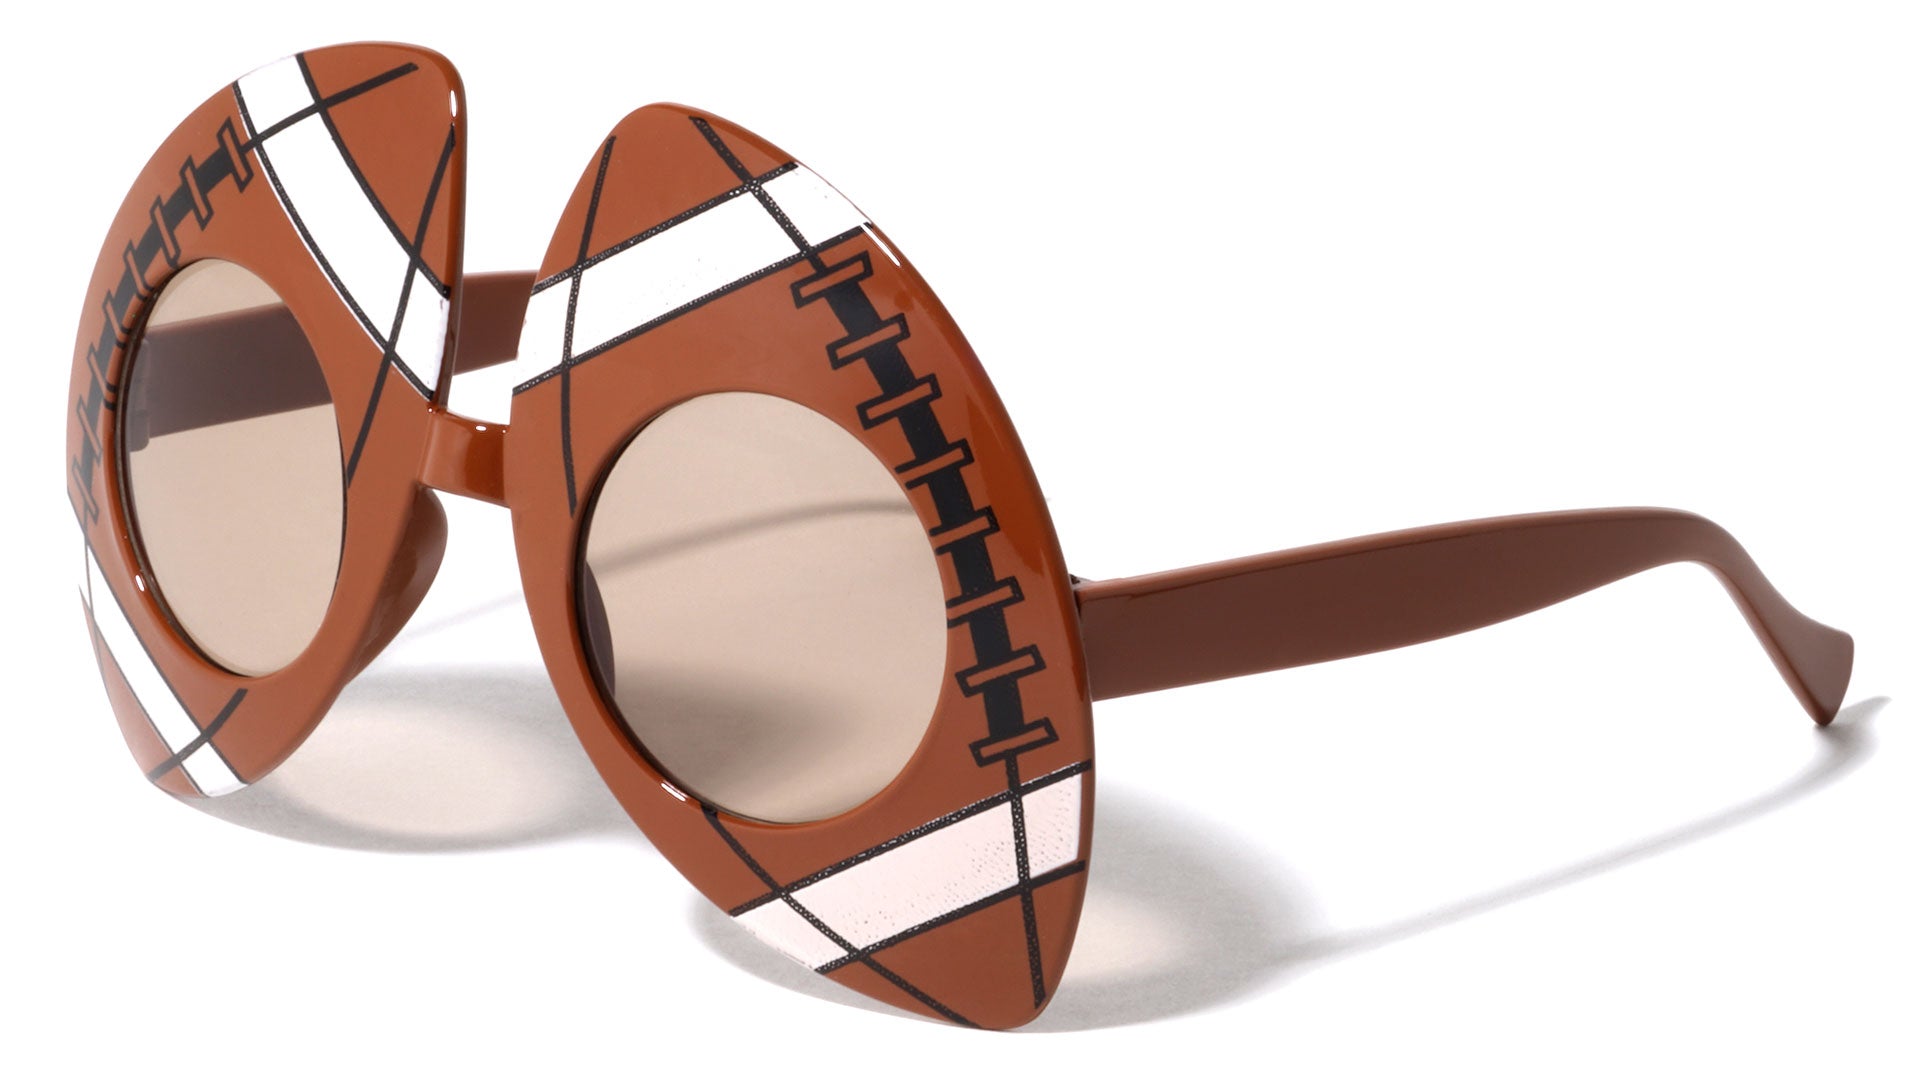 Football Party Glasses - Frontier Fashion, Inc.